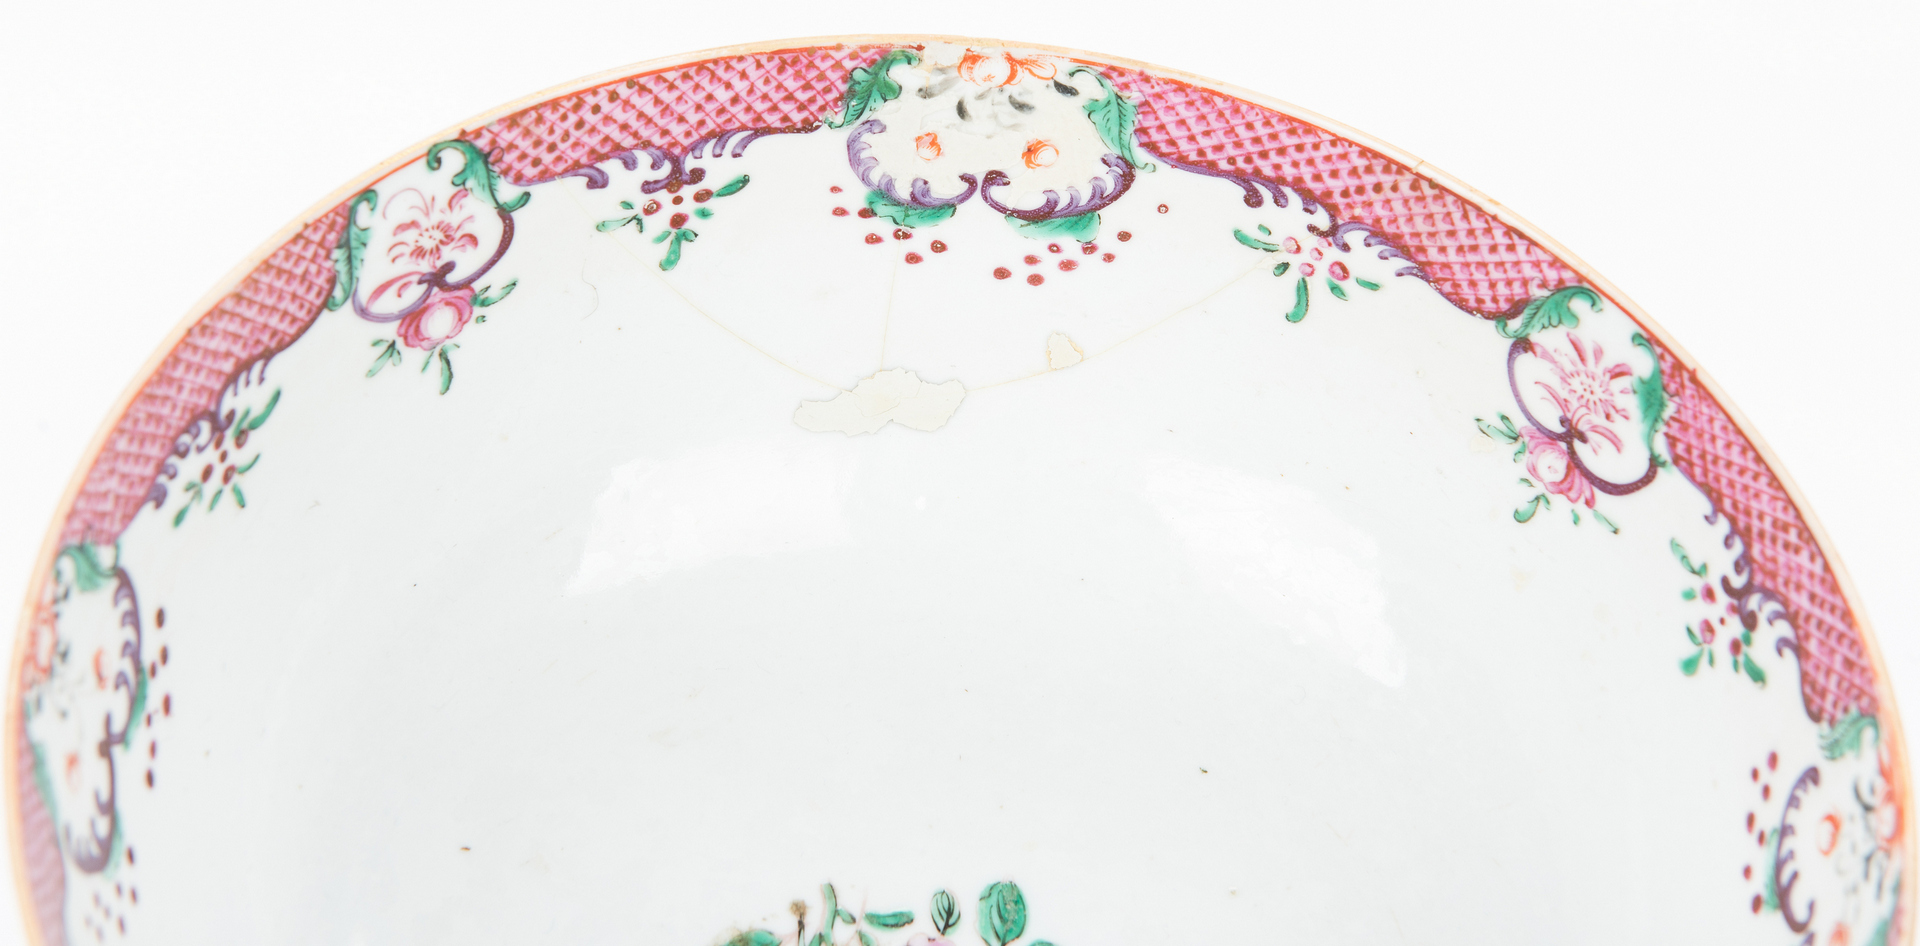 Lot 337: 2 Chinese Export Famille Rose Bowls, 1 19th century